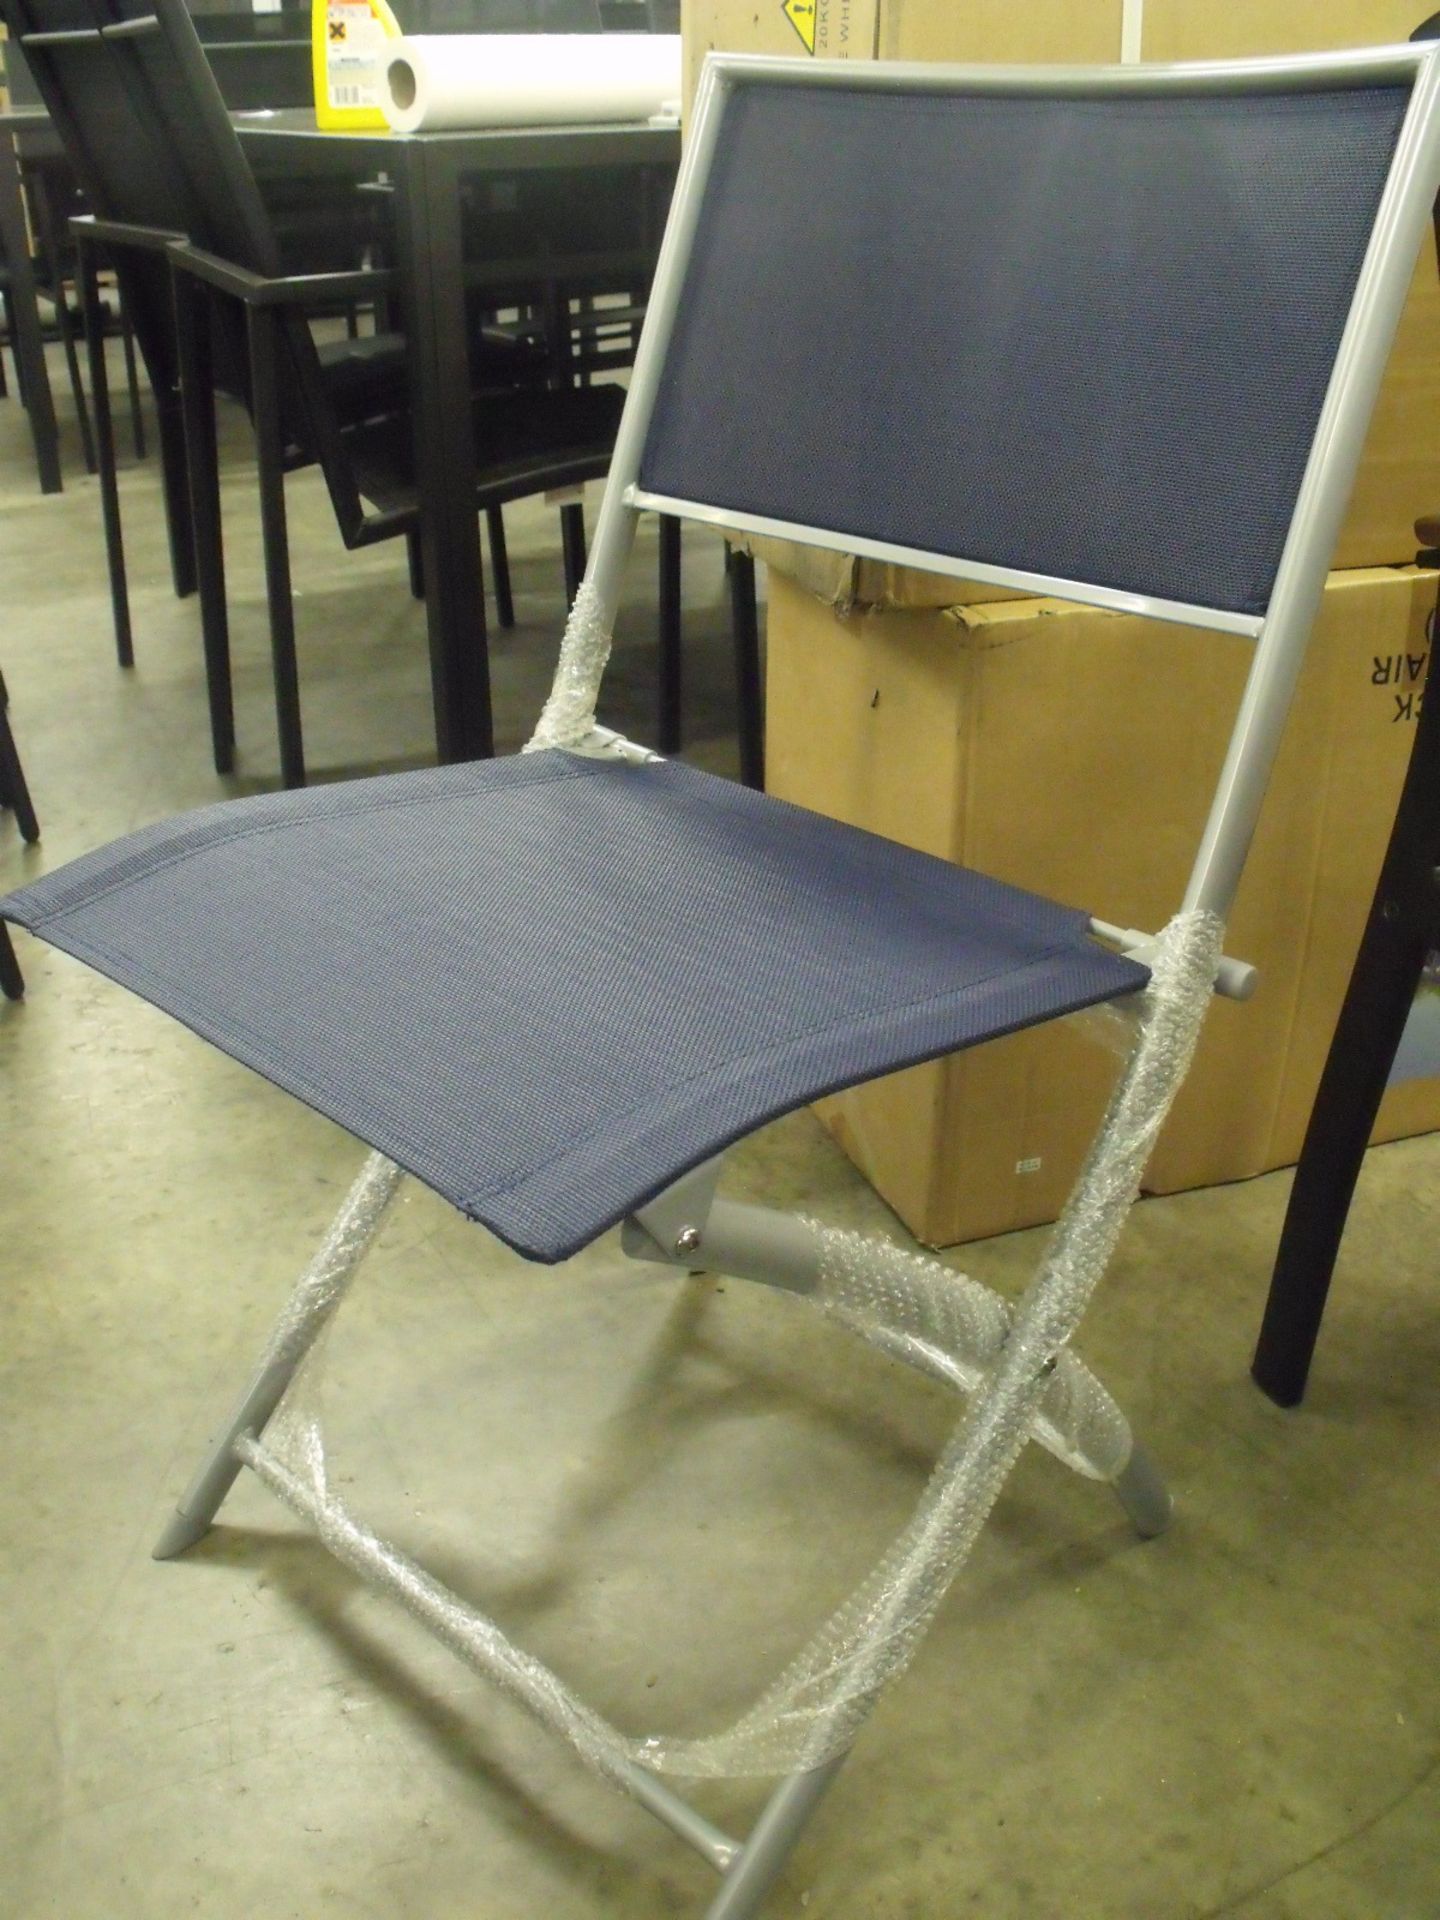 6 x New and Boxed Folding Garden Chairs. Silver frame with blue textilene covering